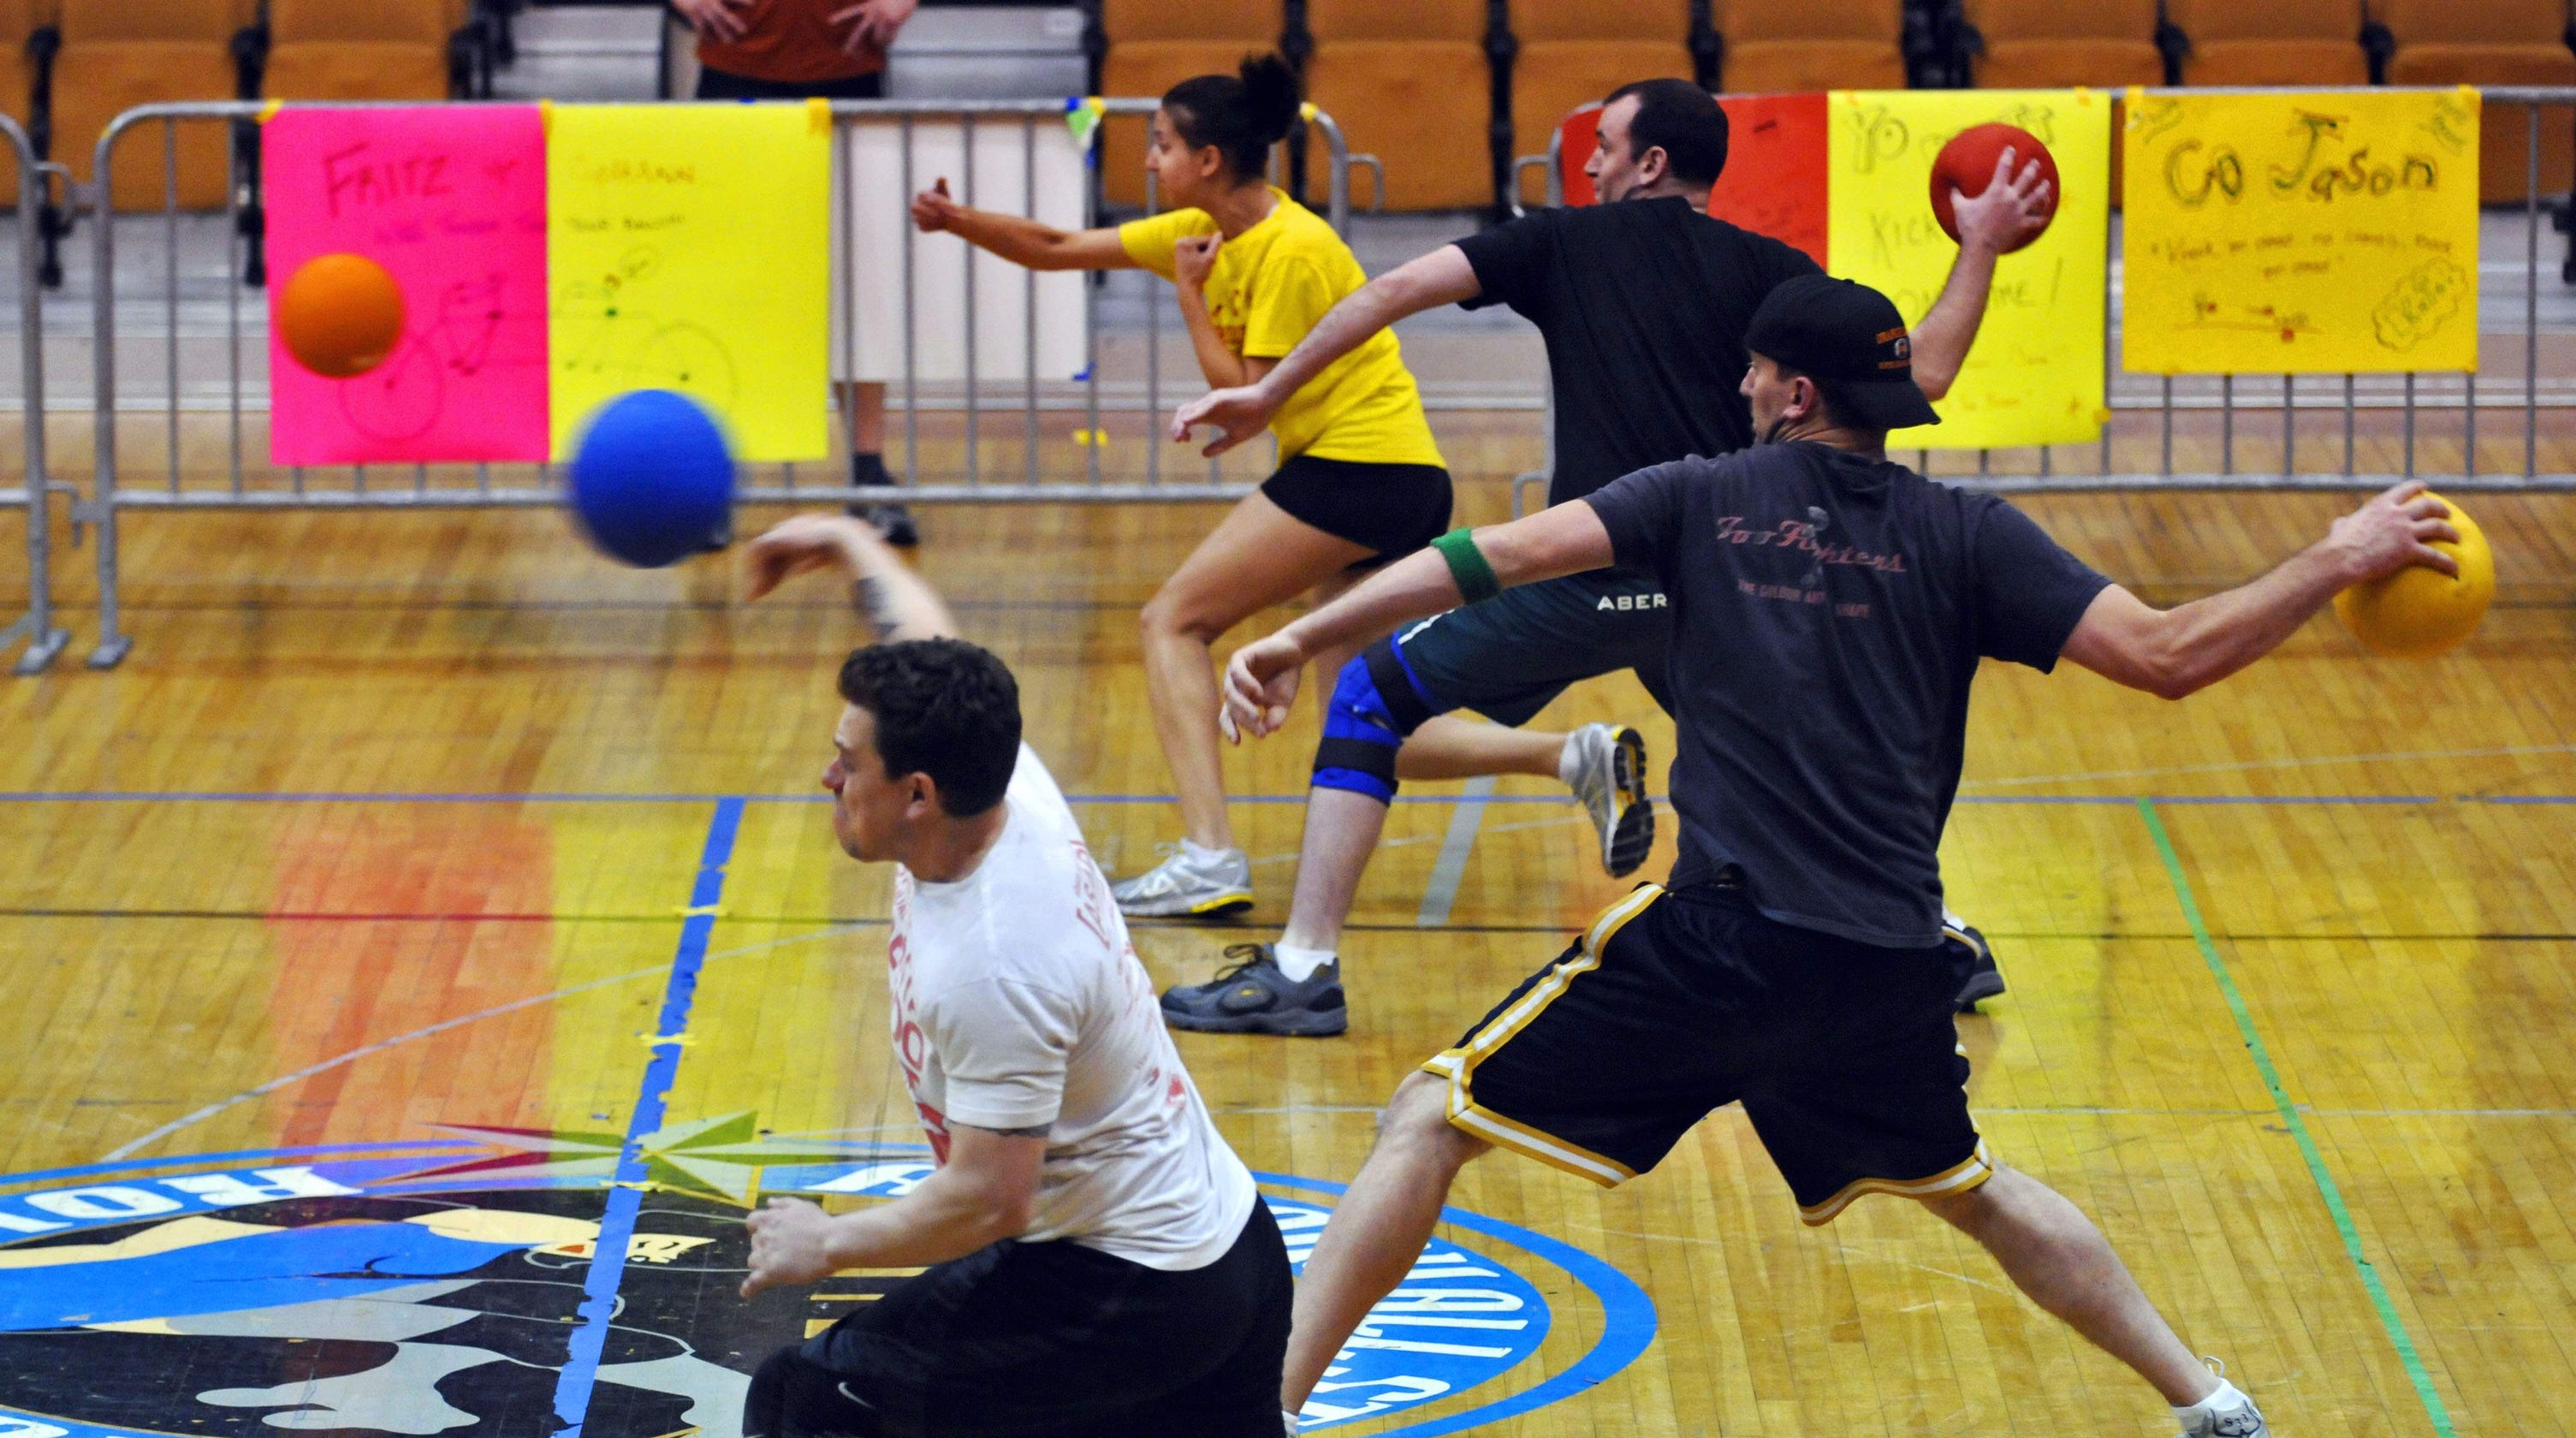 Efb48ebc 2c06 47c1 8588 D2e63b292c0a AP Dodgeball Record.JPG?crop=4287,2393,x0,y112&width=3200&height=1680&fit=bounds